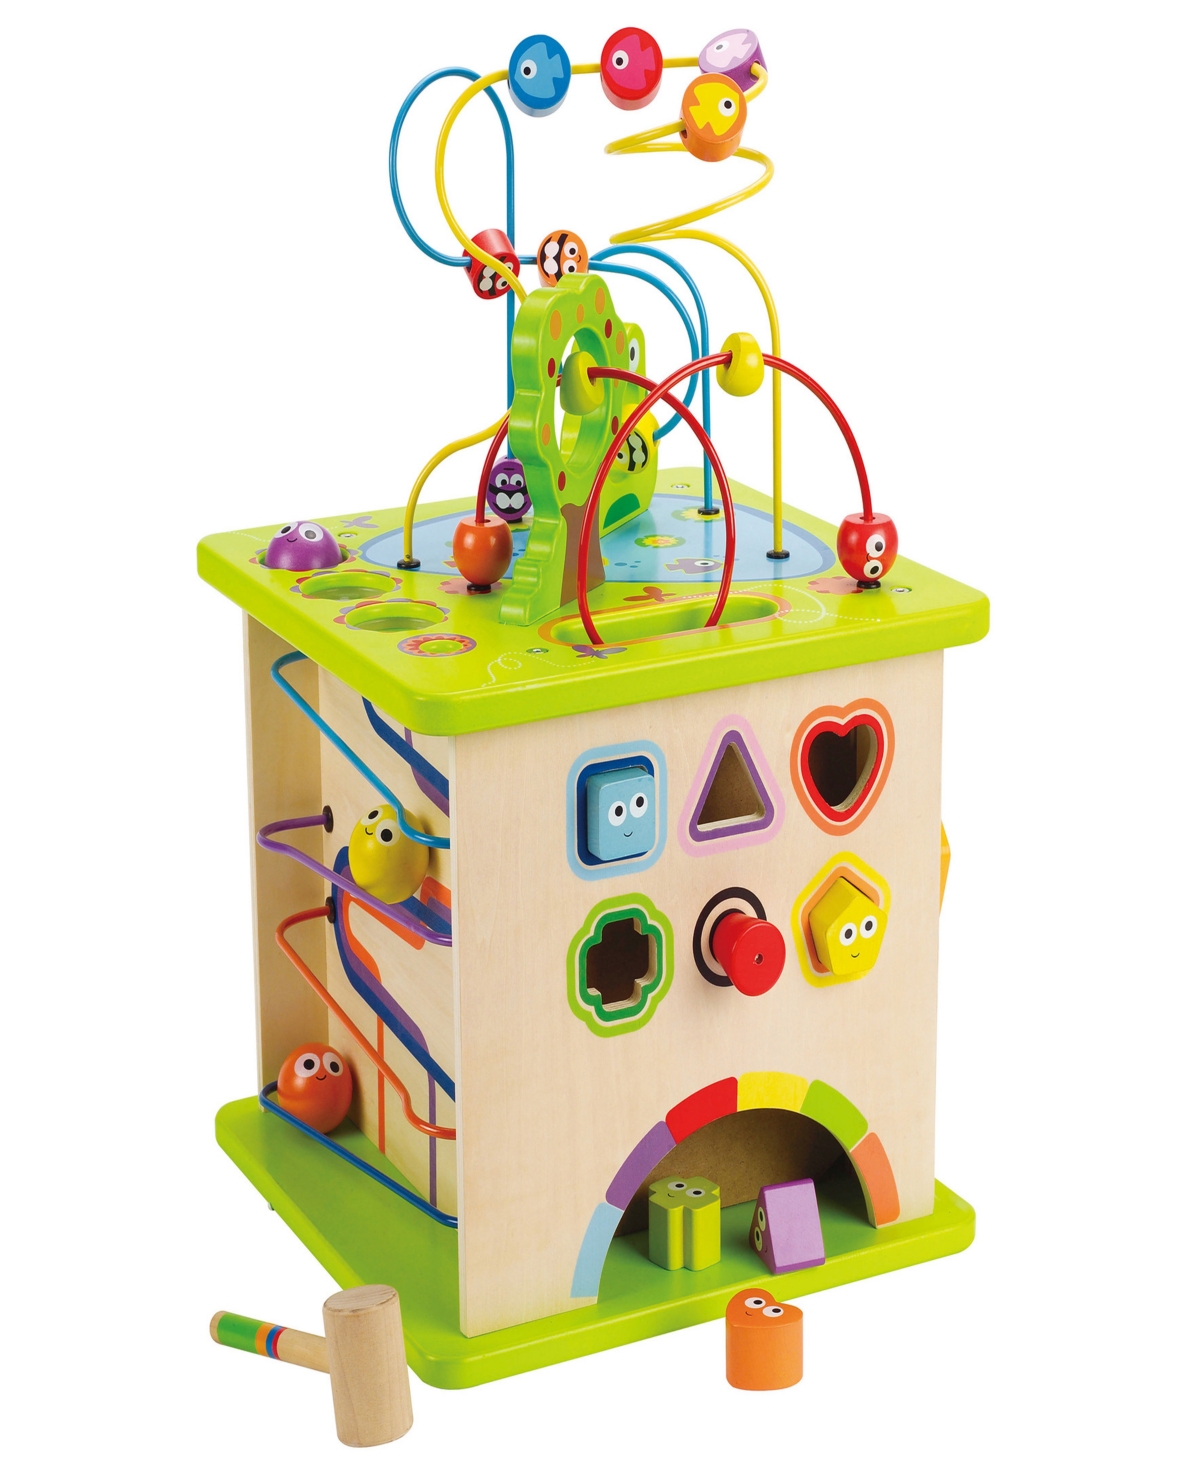 Hape Country Critters 5-sided Play Cube Puzzle Toy In Multi